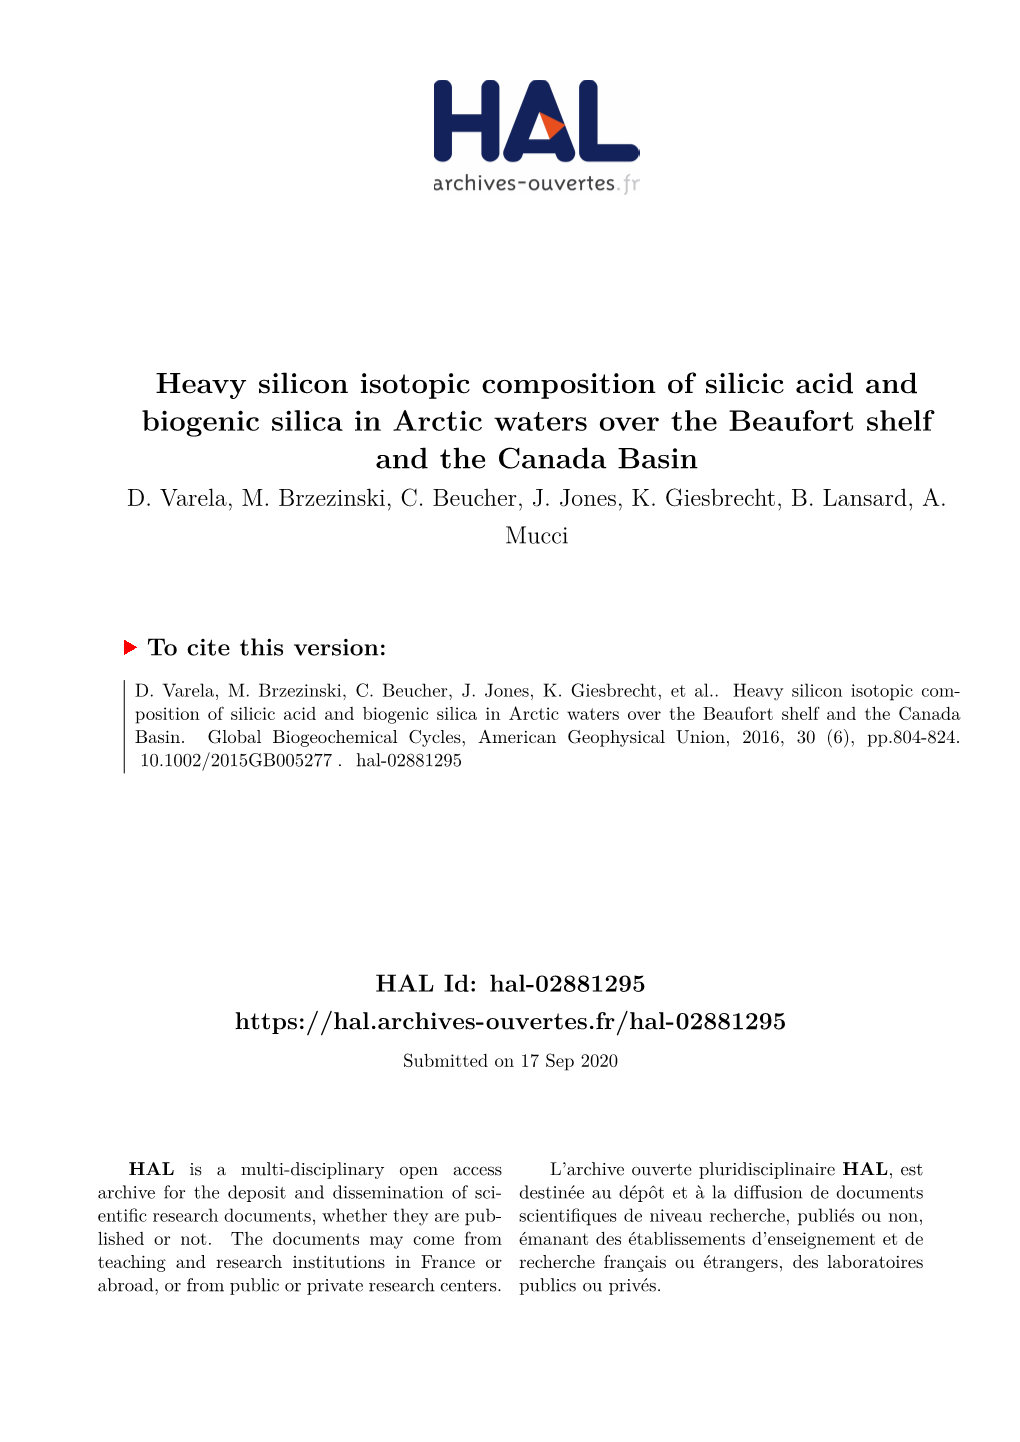 Heavy Silicon Isotopic Composition of Silicic Acid and Biogenic Silica in Arctic Waters Over the Beaufort Shelf and the Canada Basin D